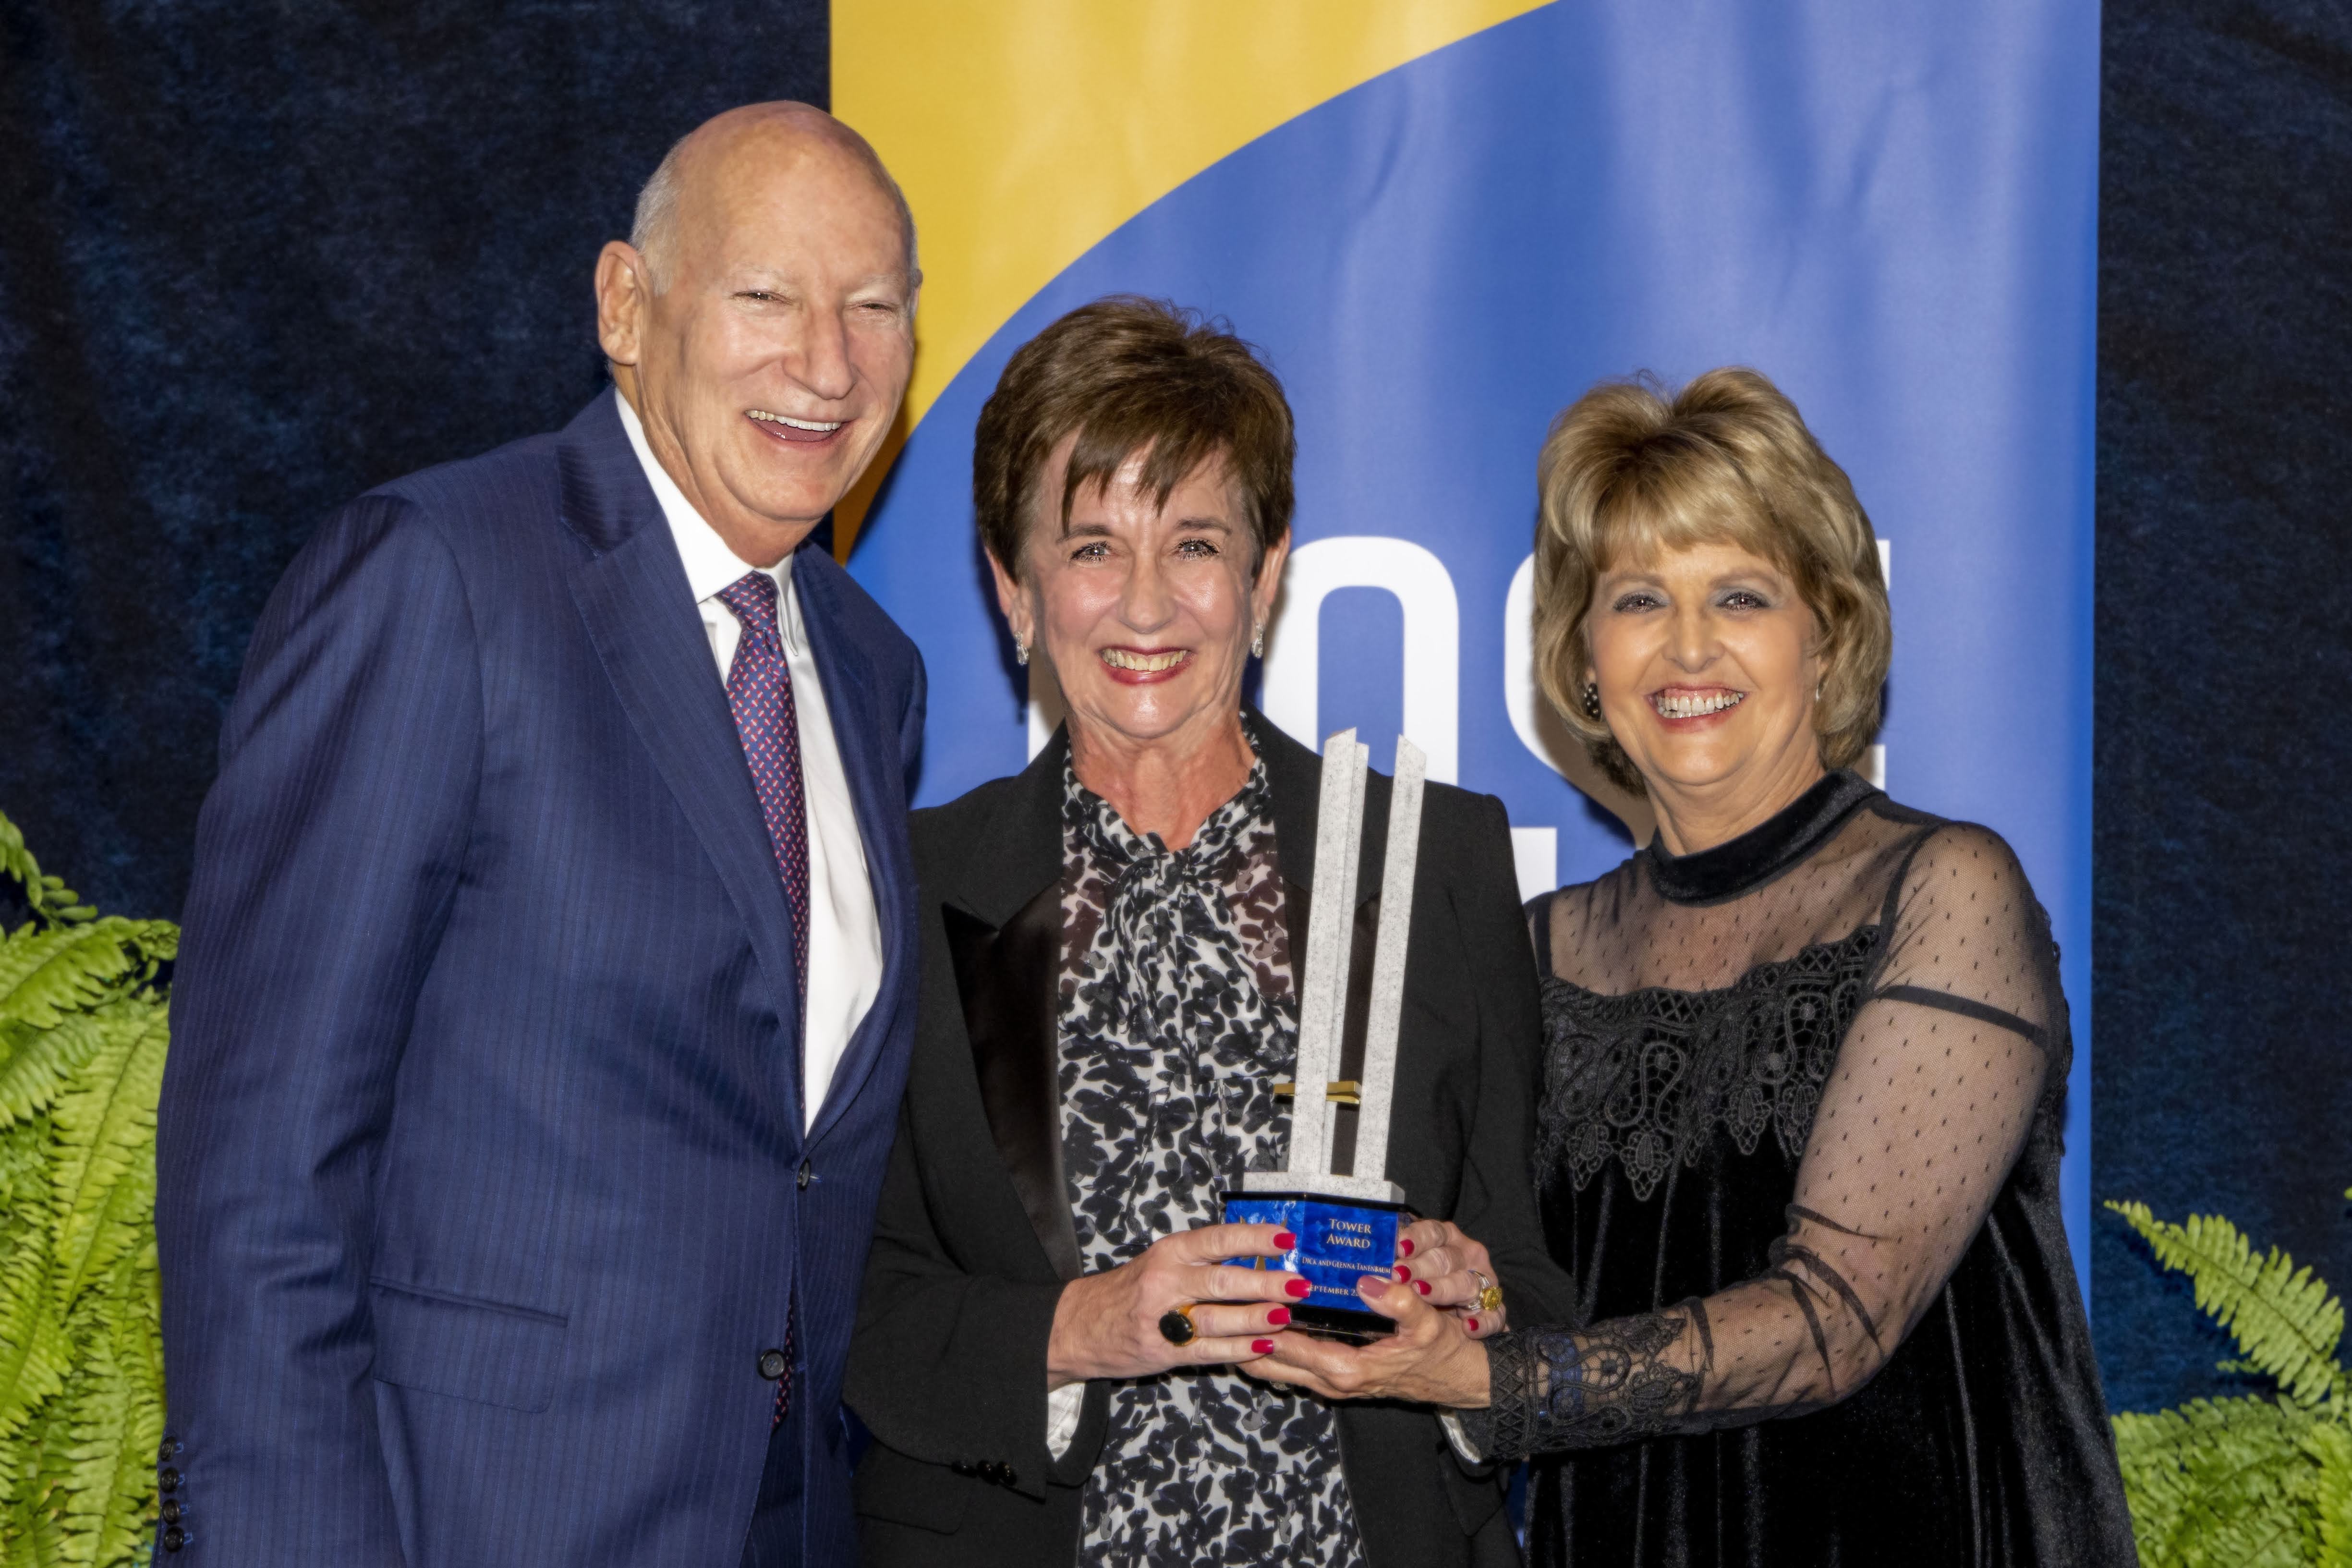 Dick and Glenna Tanenbaum pose with their Tower Award and President Webb.